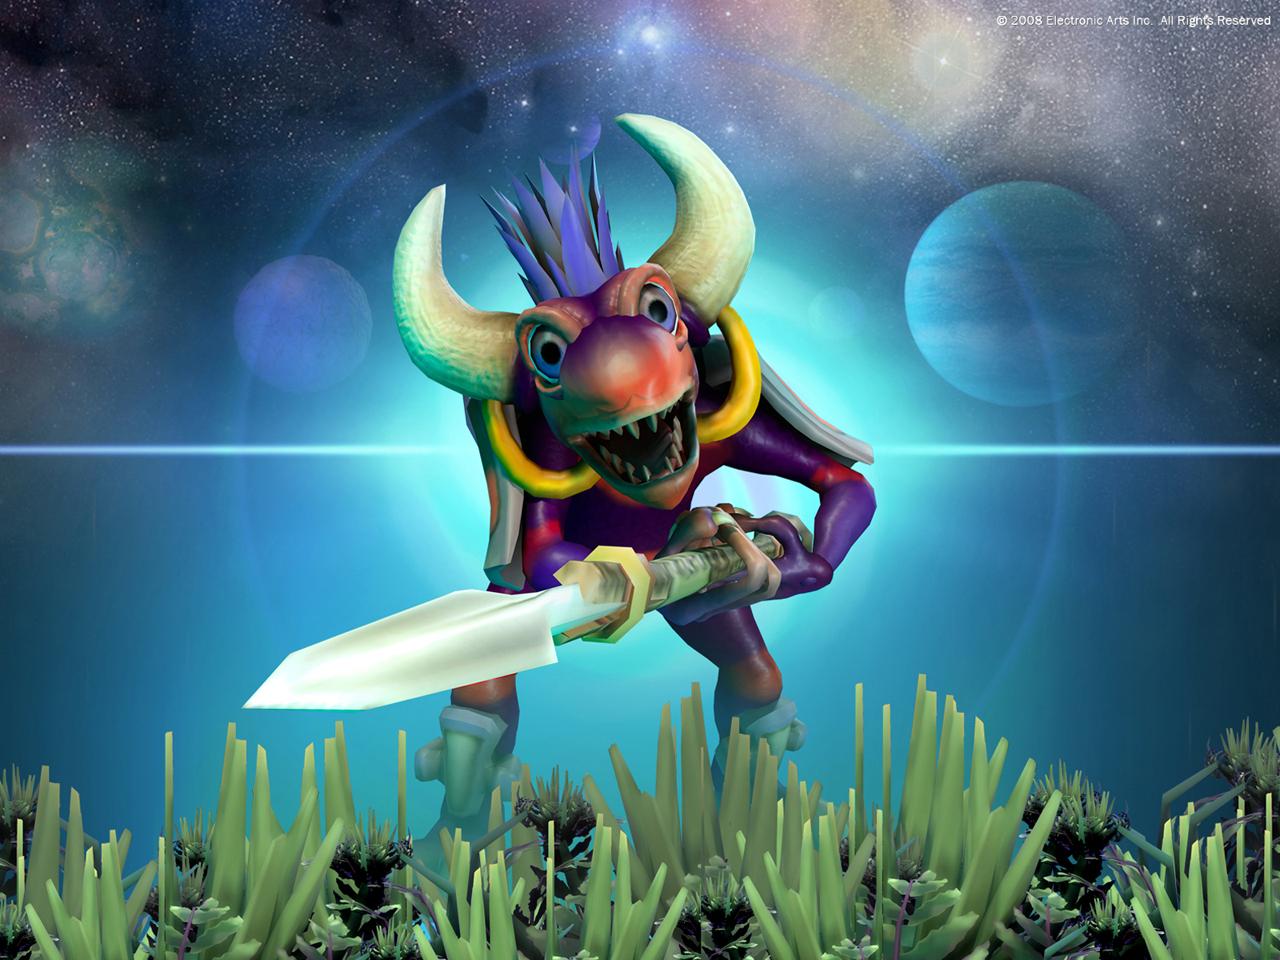 how to download spore full version mac